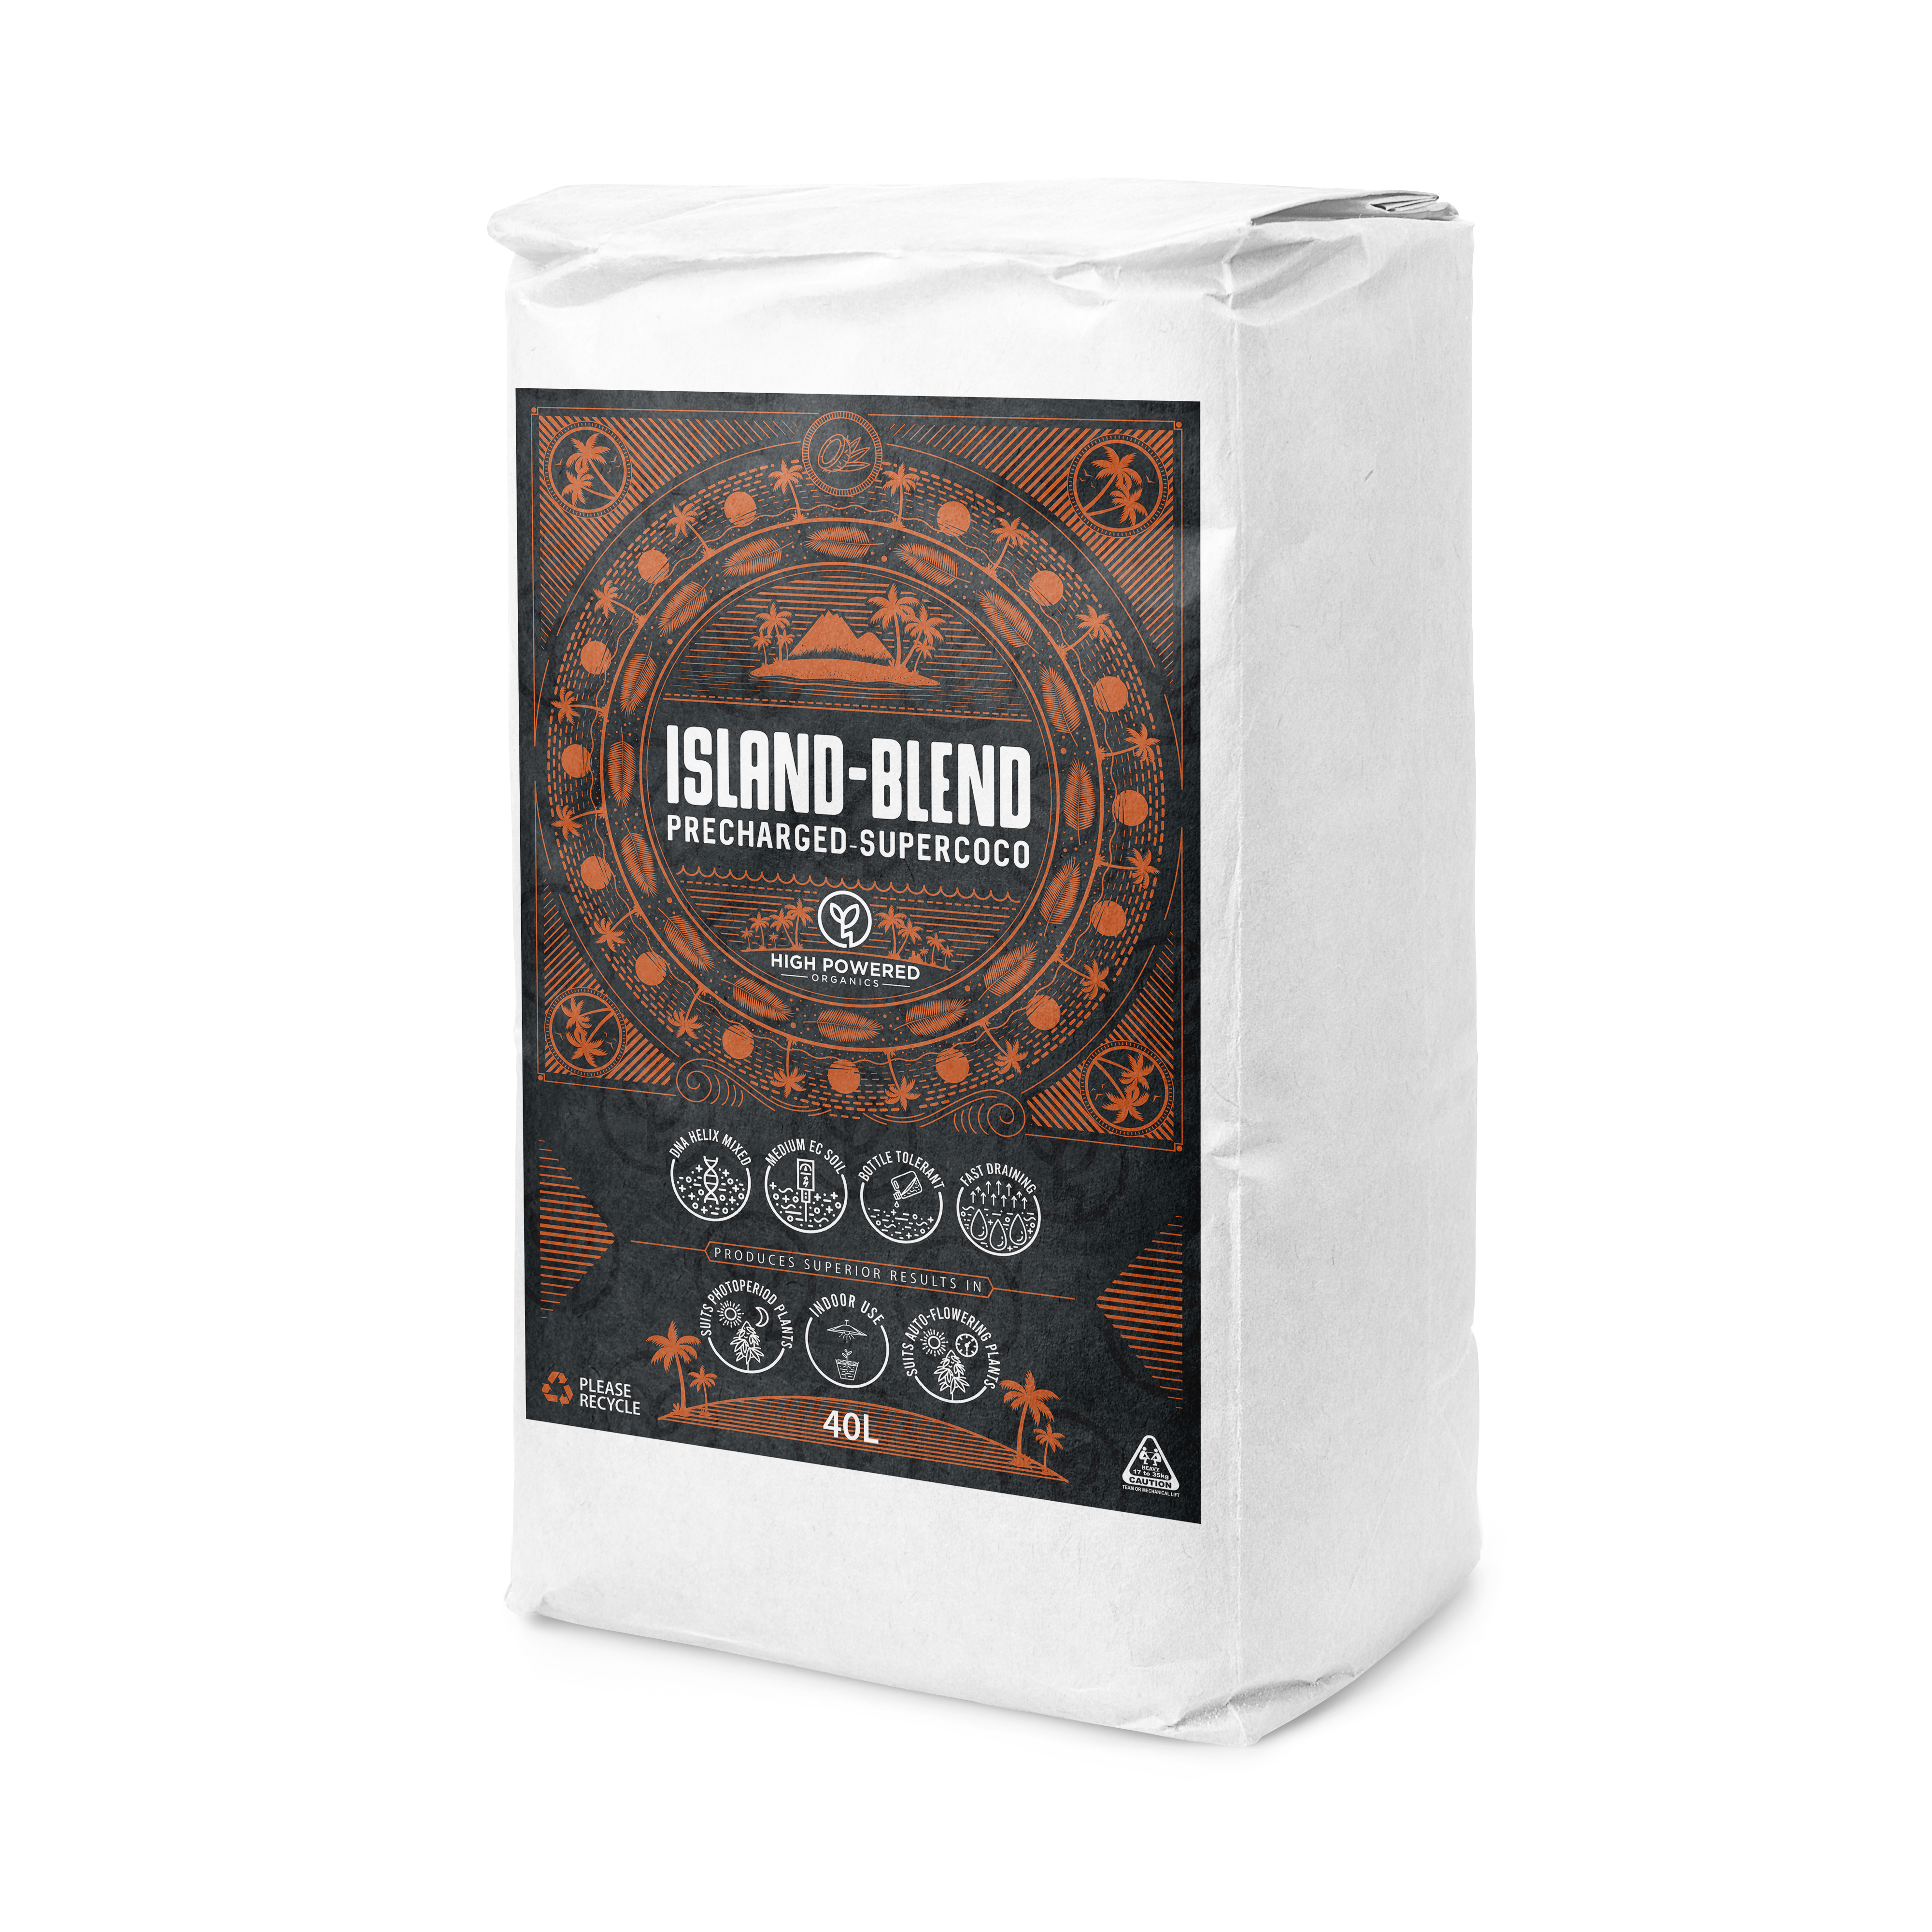 ISLAND-BLEND™ Pre-Charged Super Coco